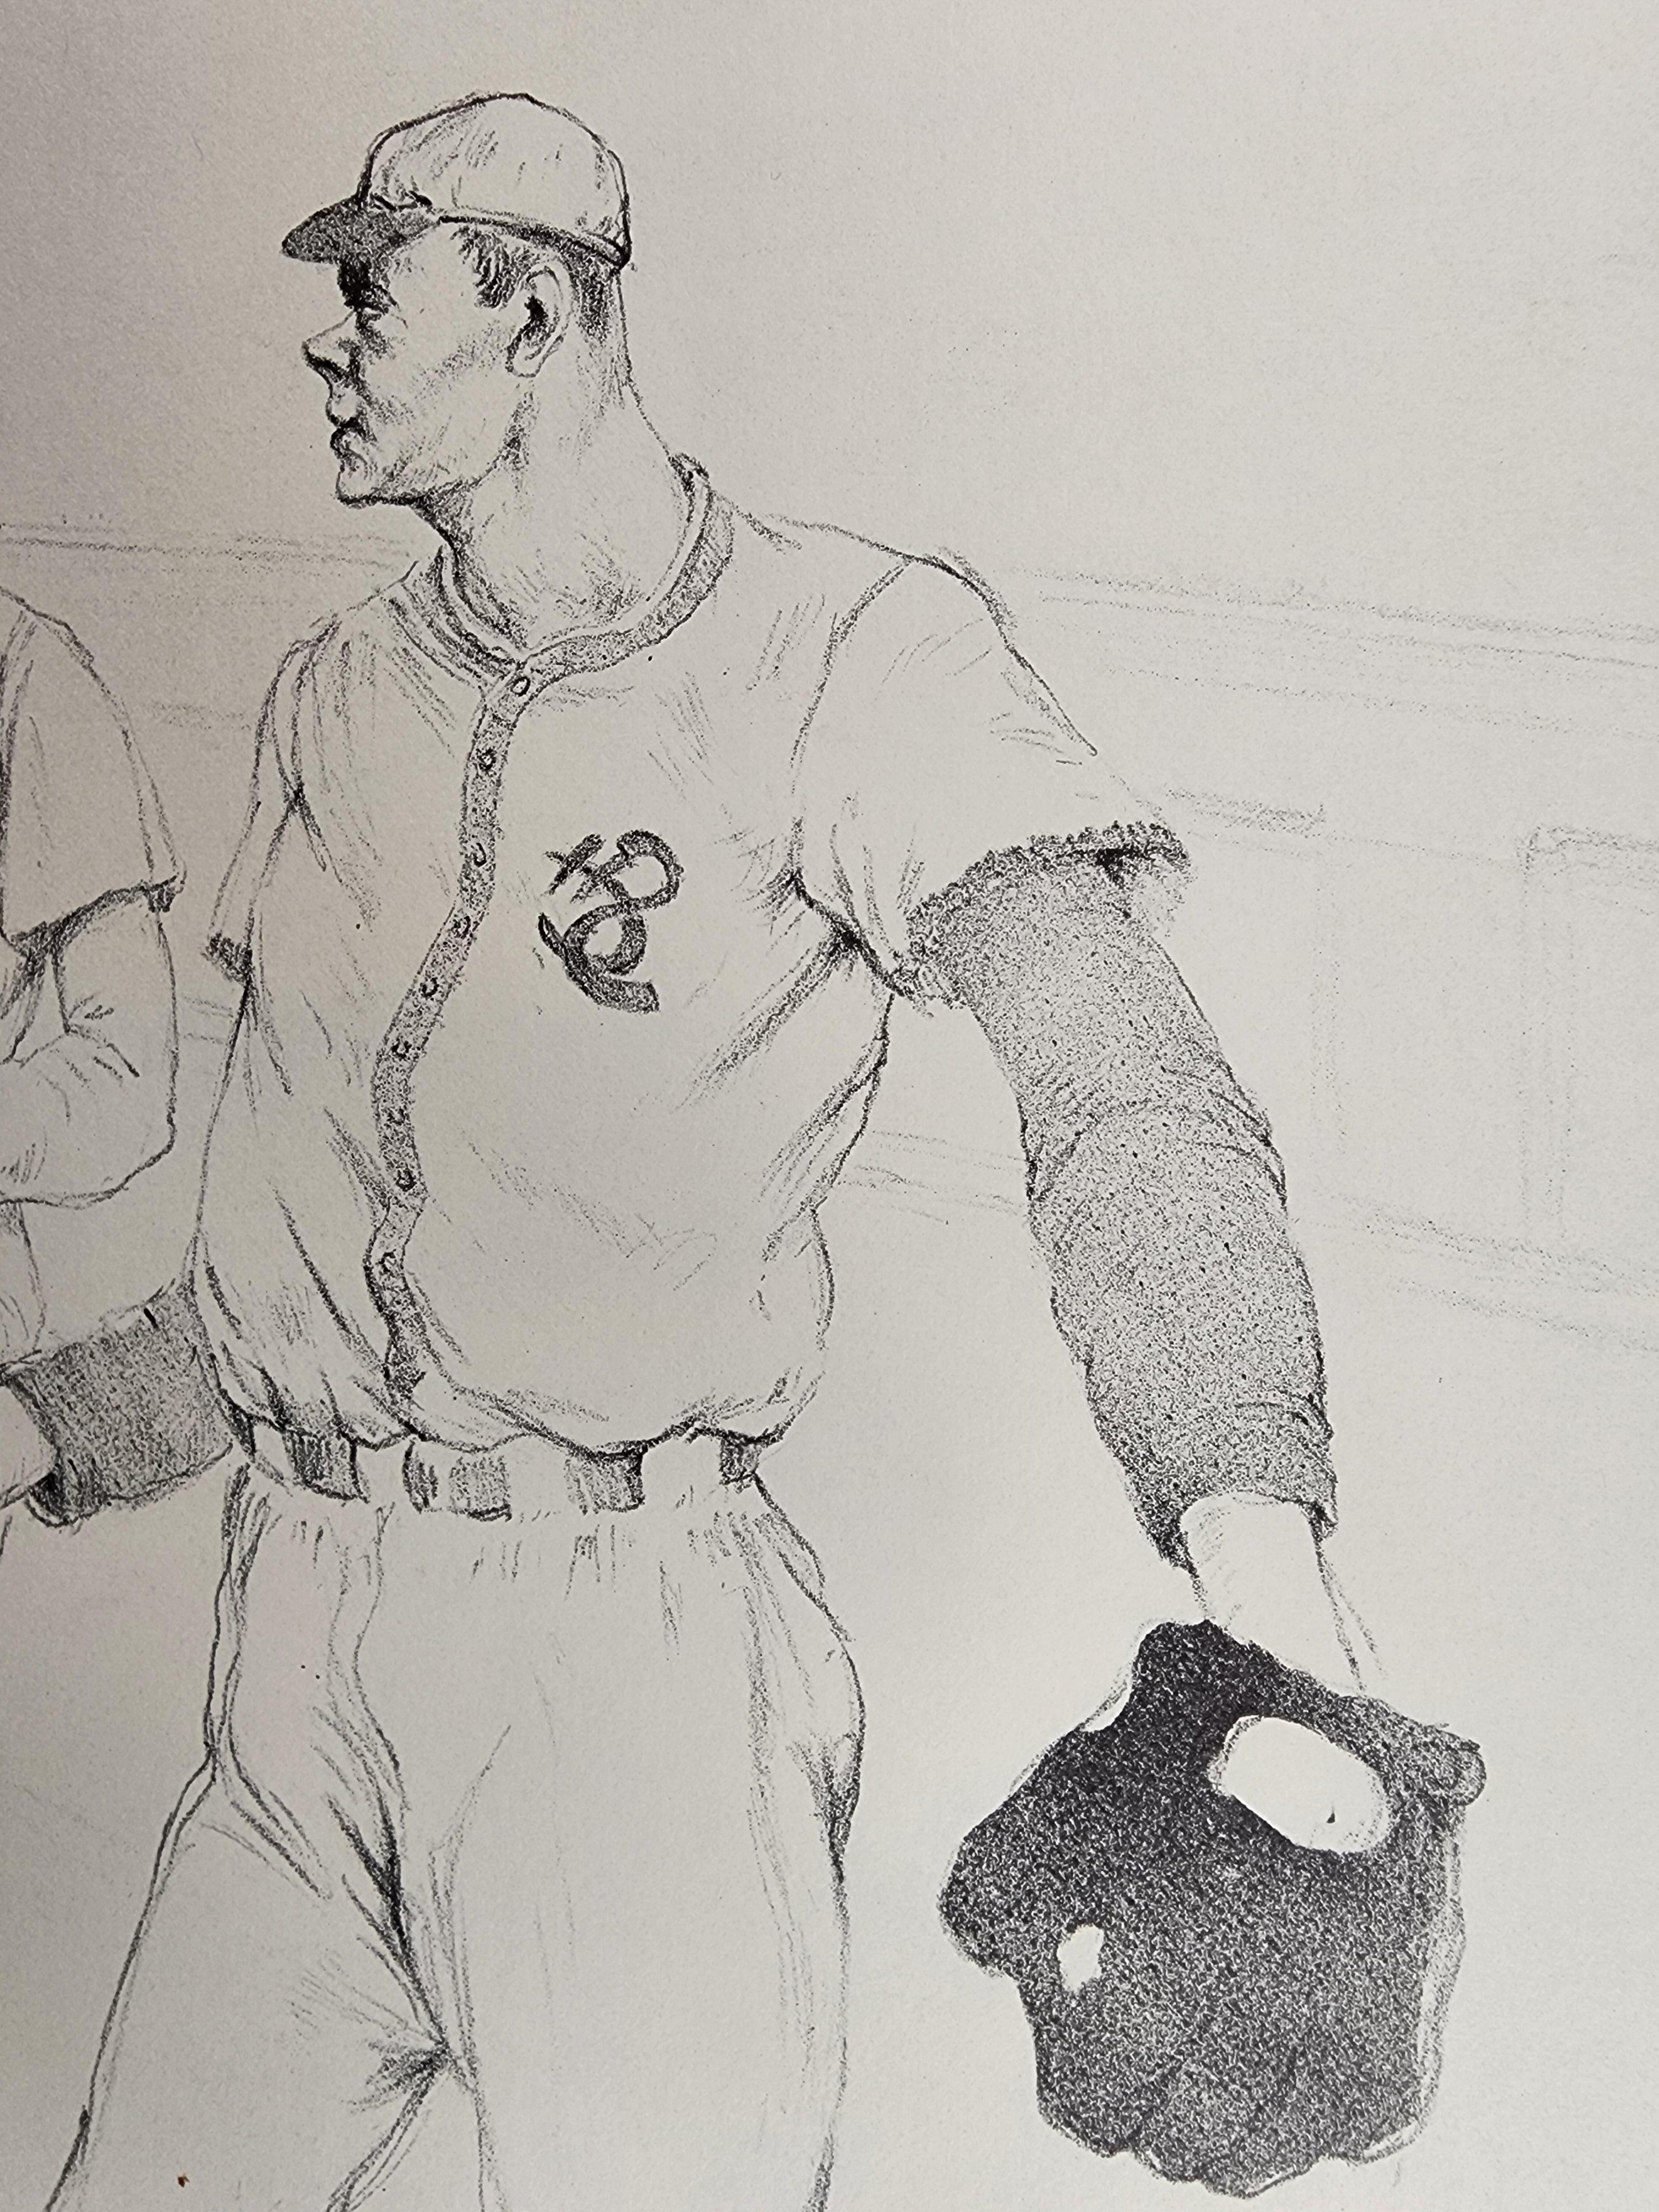 RGRFINEARTS is pleased to offer this baseball themed lithograph of Alibi Ike after the character in the 1935 movie.
A fine example of the draftsmanship that Pickhardt was known for.